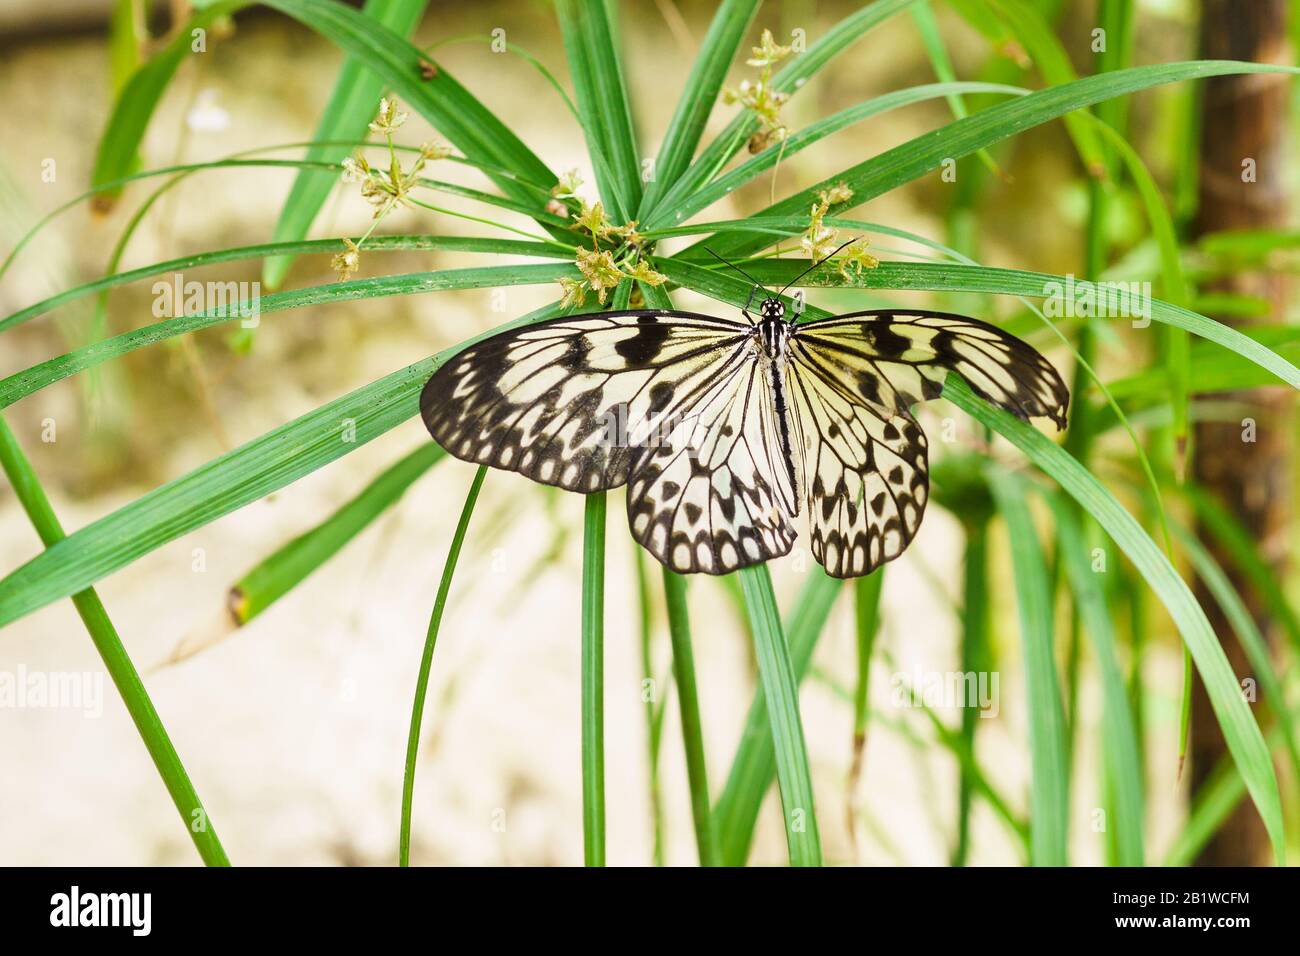 Beautiful tropical butterfly Idea white (Rice paper) or wood Nymph (lat. Idea leuconoe) on the umbrella syt or Citalnika, or Cyperus (lat. Cyperus) Stock Photo